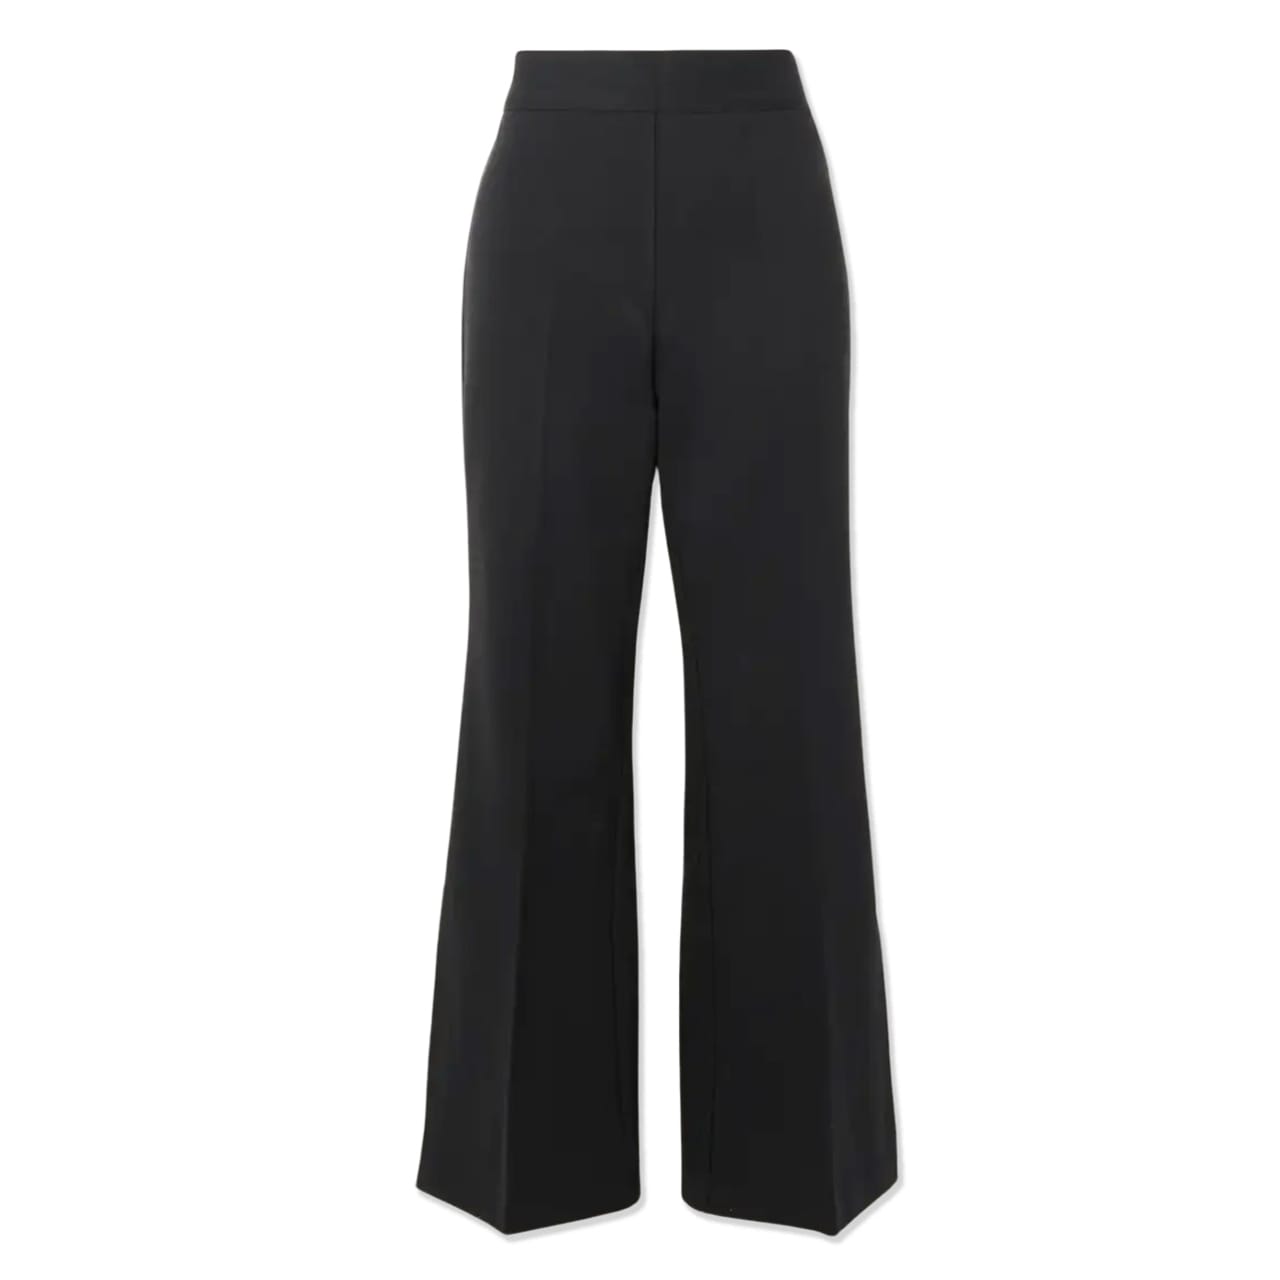 14 Best Work Pants for Women, According to Style Pros - Buy Side